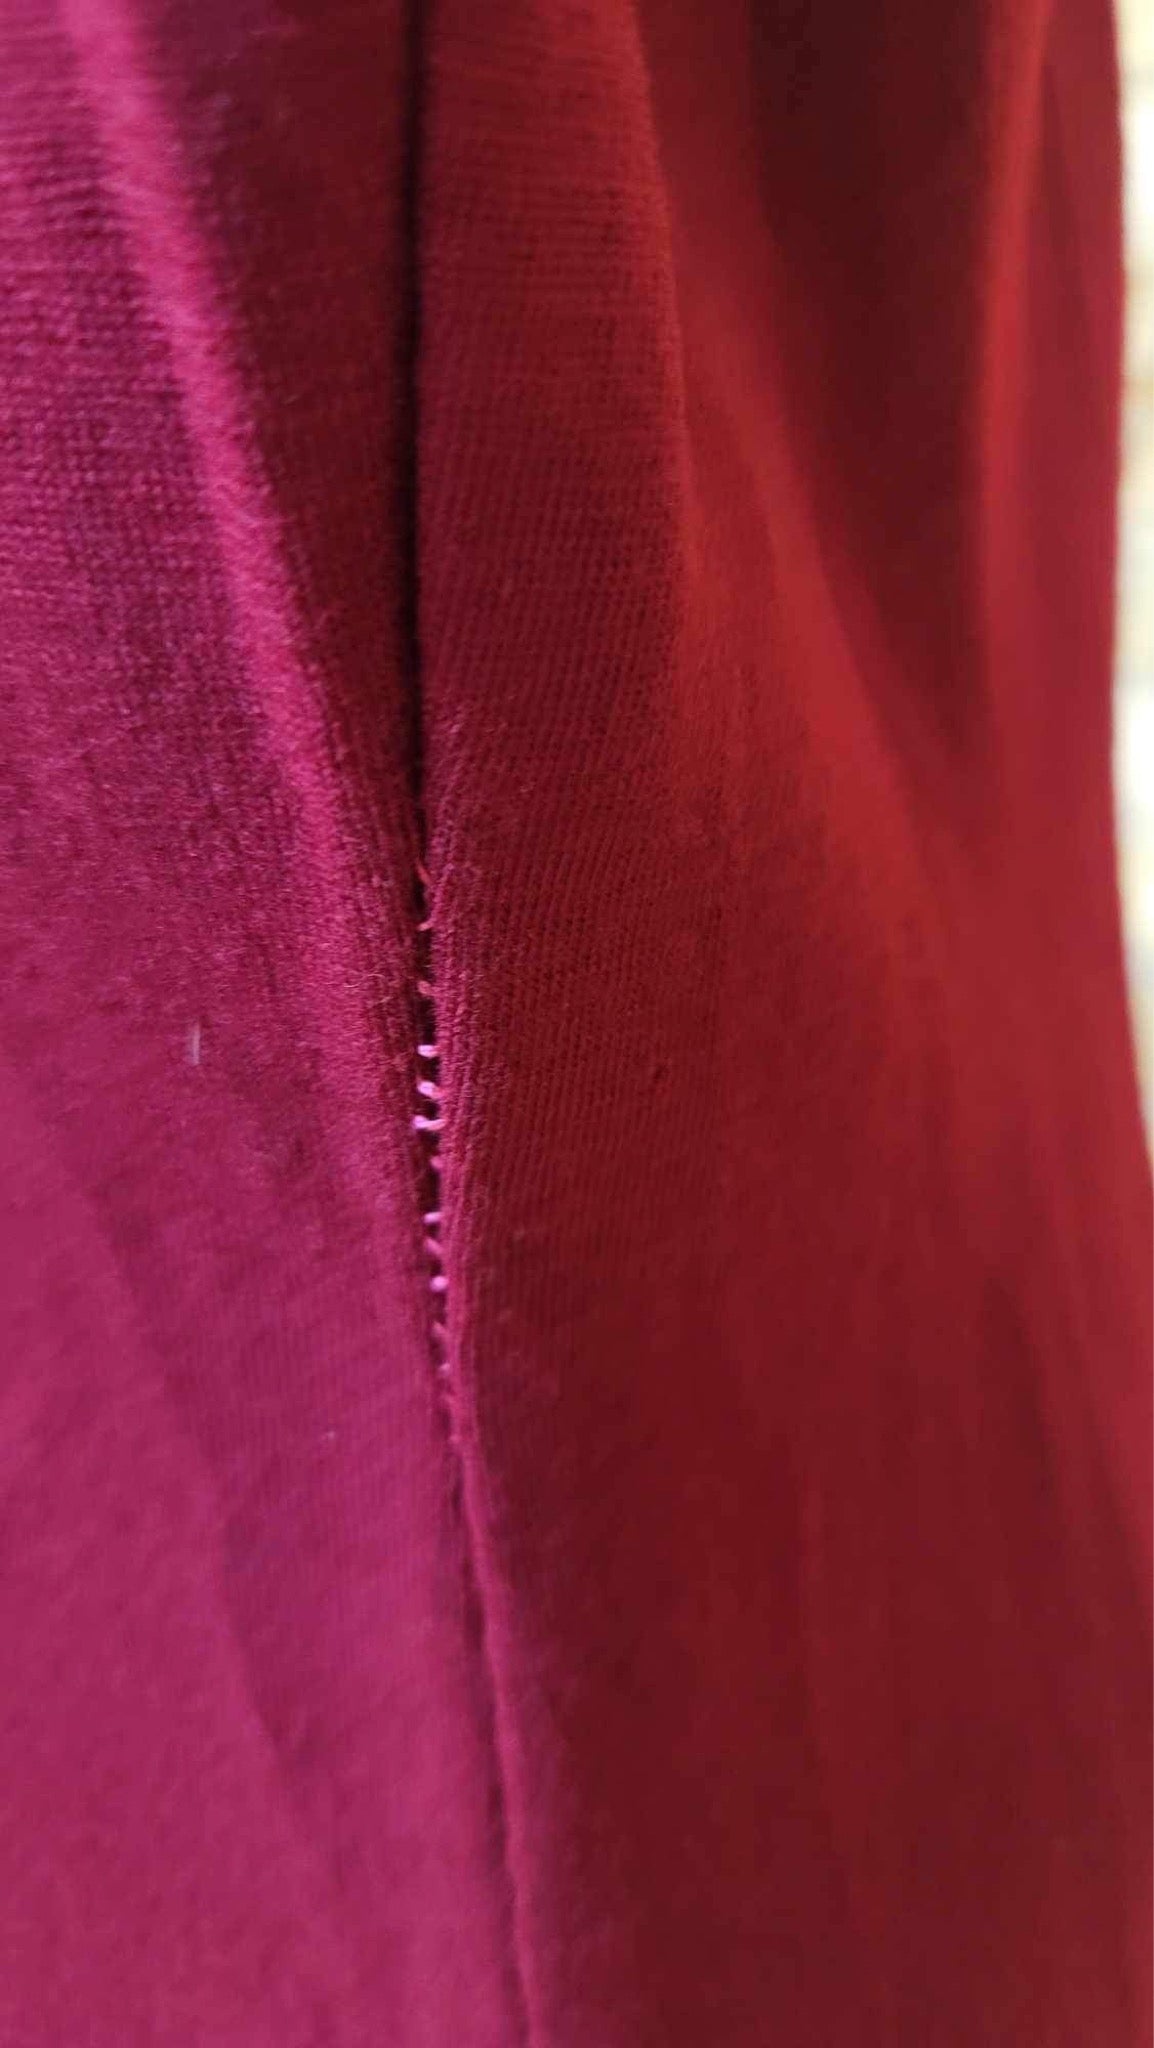 Severely Wounded Burgandy Dress